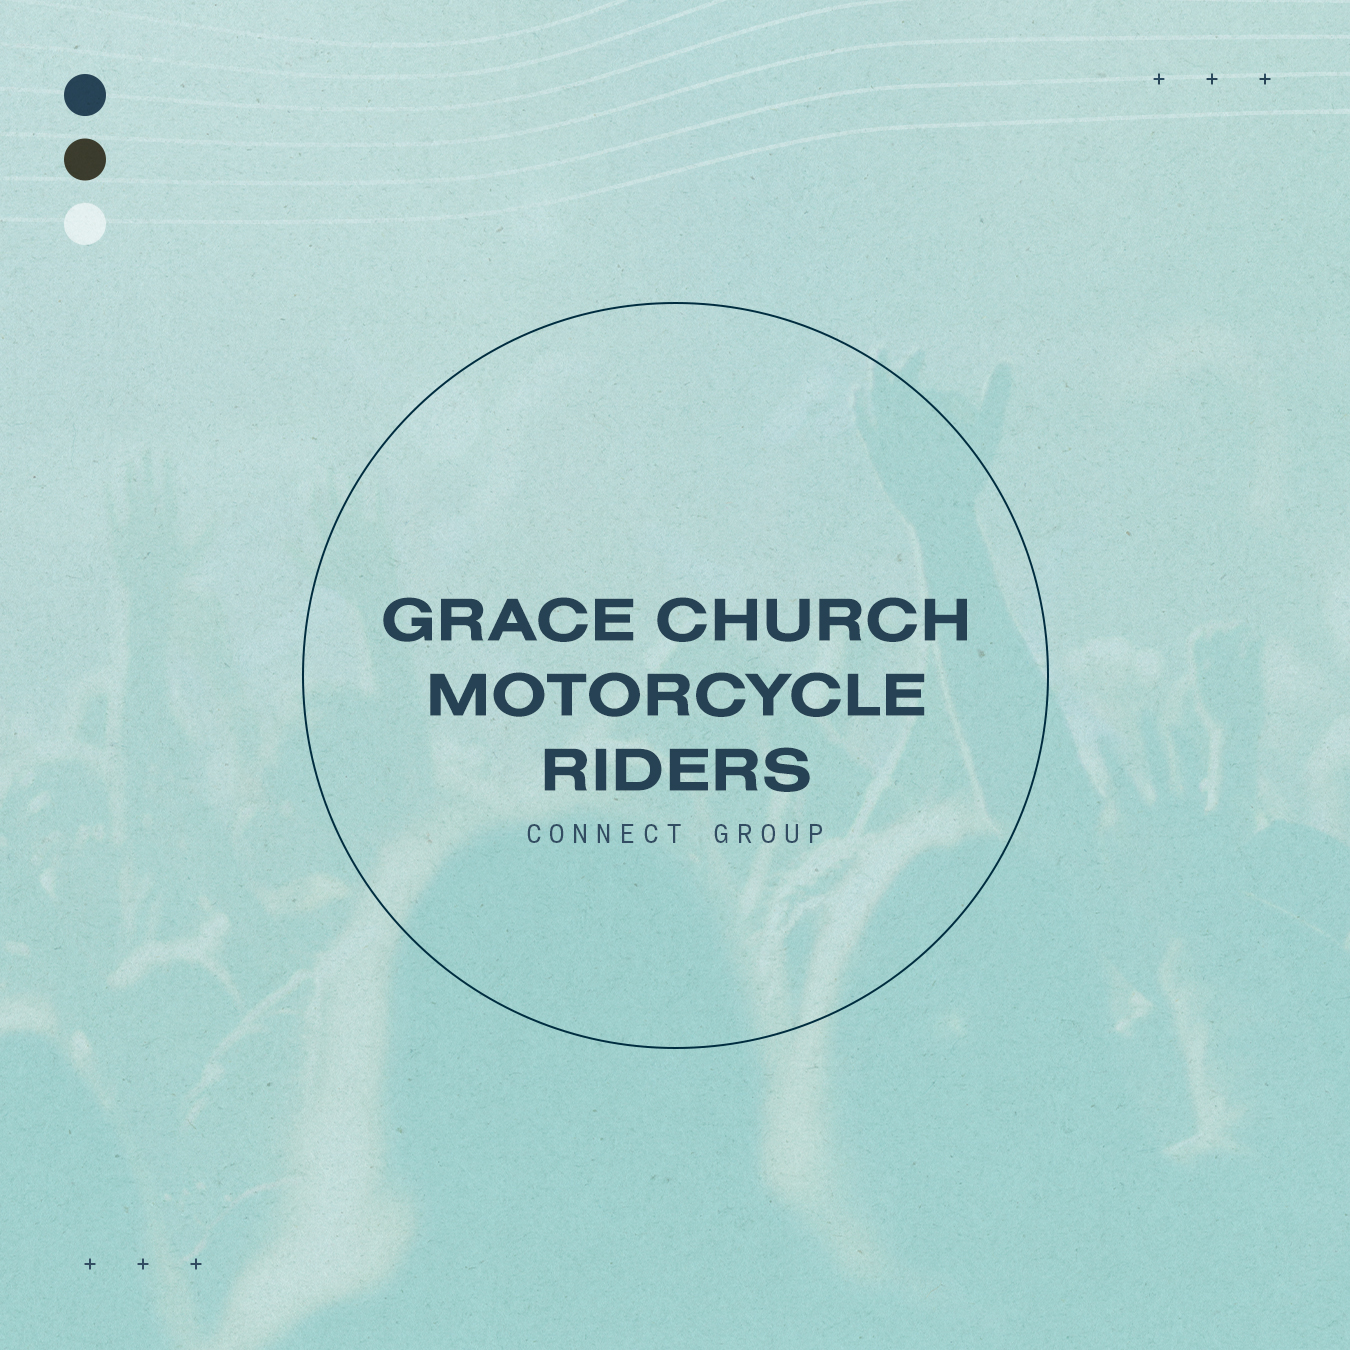 Grace Church Motorcycle Riders image